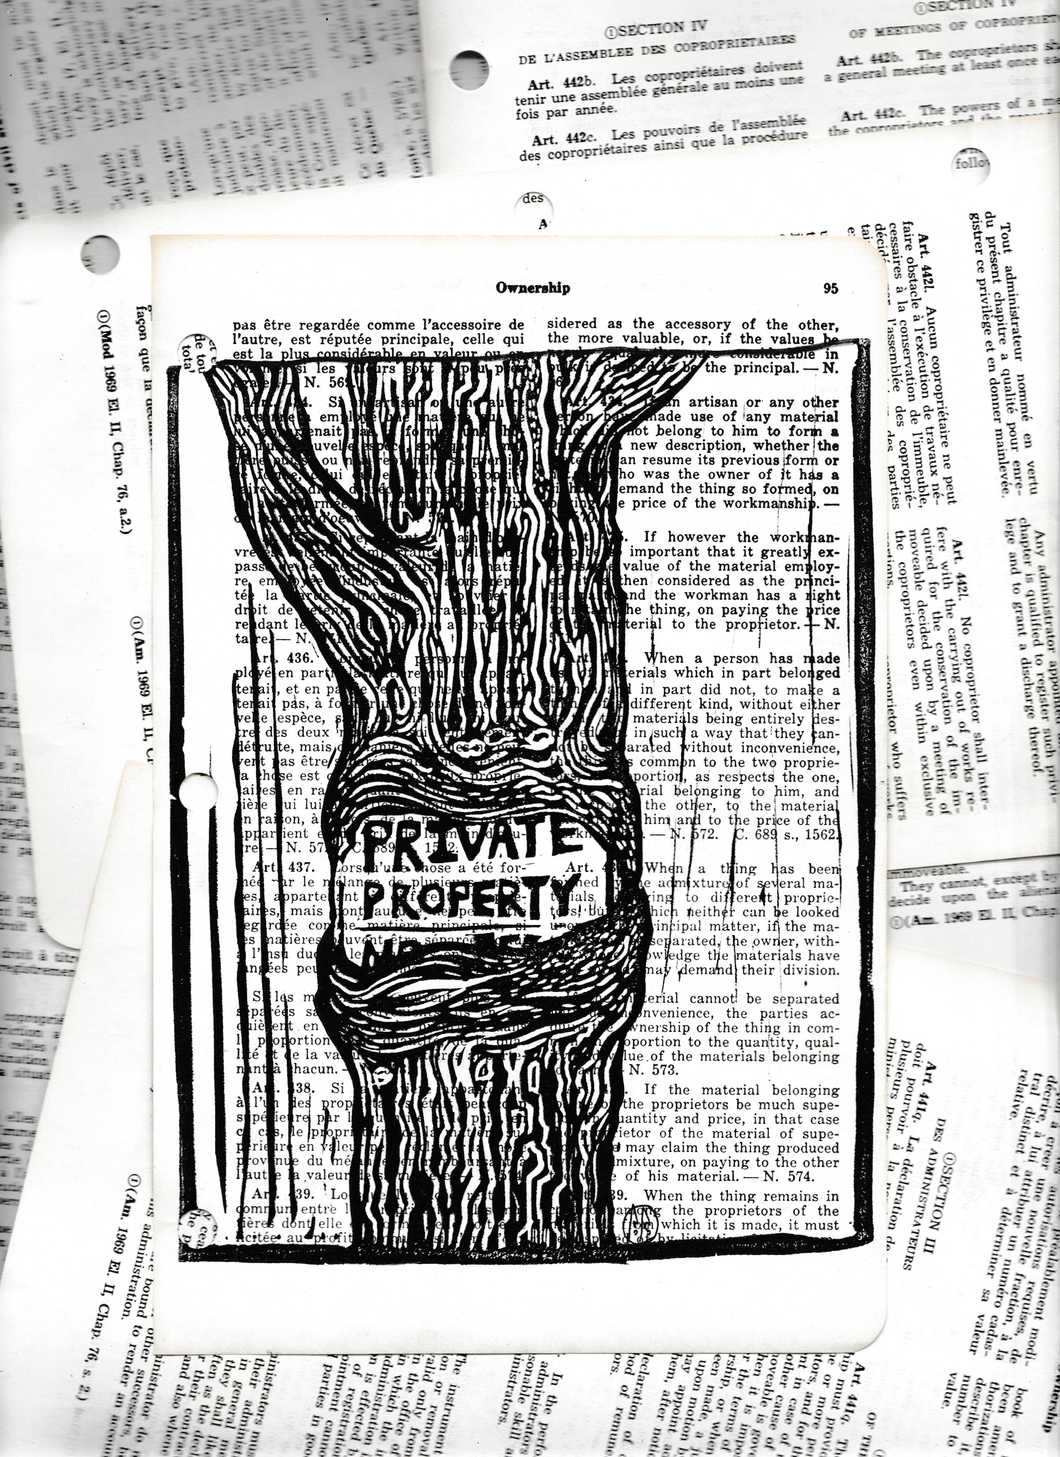 Private property - Tree linocut print on civil code book page